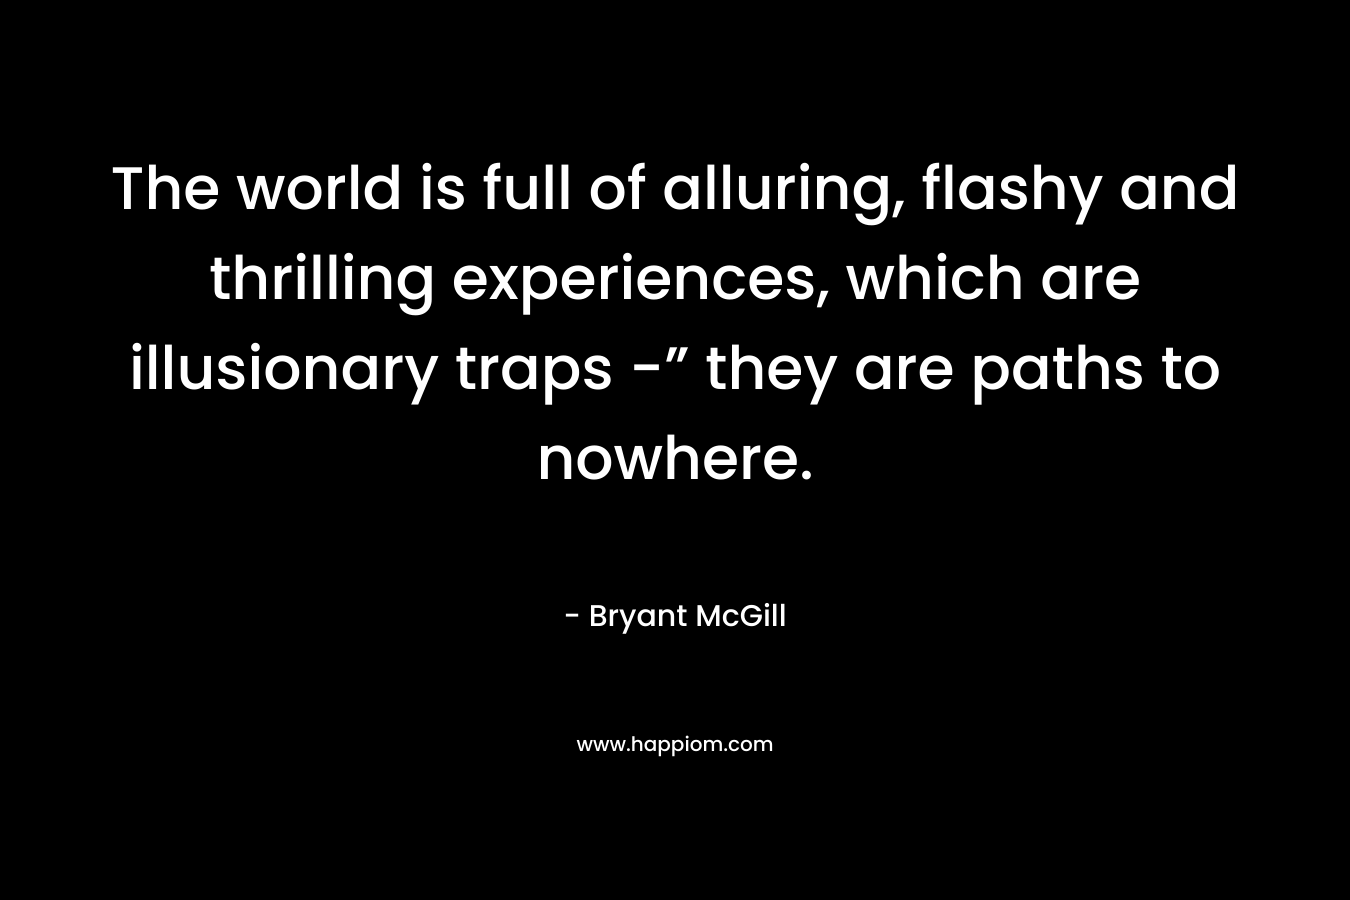 The world is full of alluring, flashy and thrilling experiences, which are illusionary traps -” they are paths to nowhere.